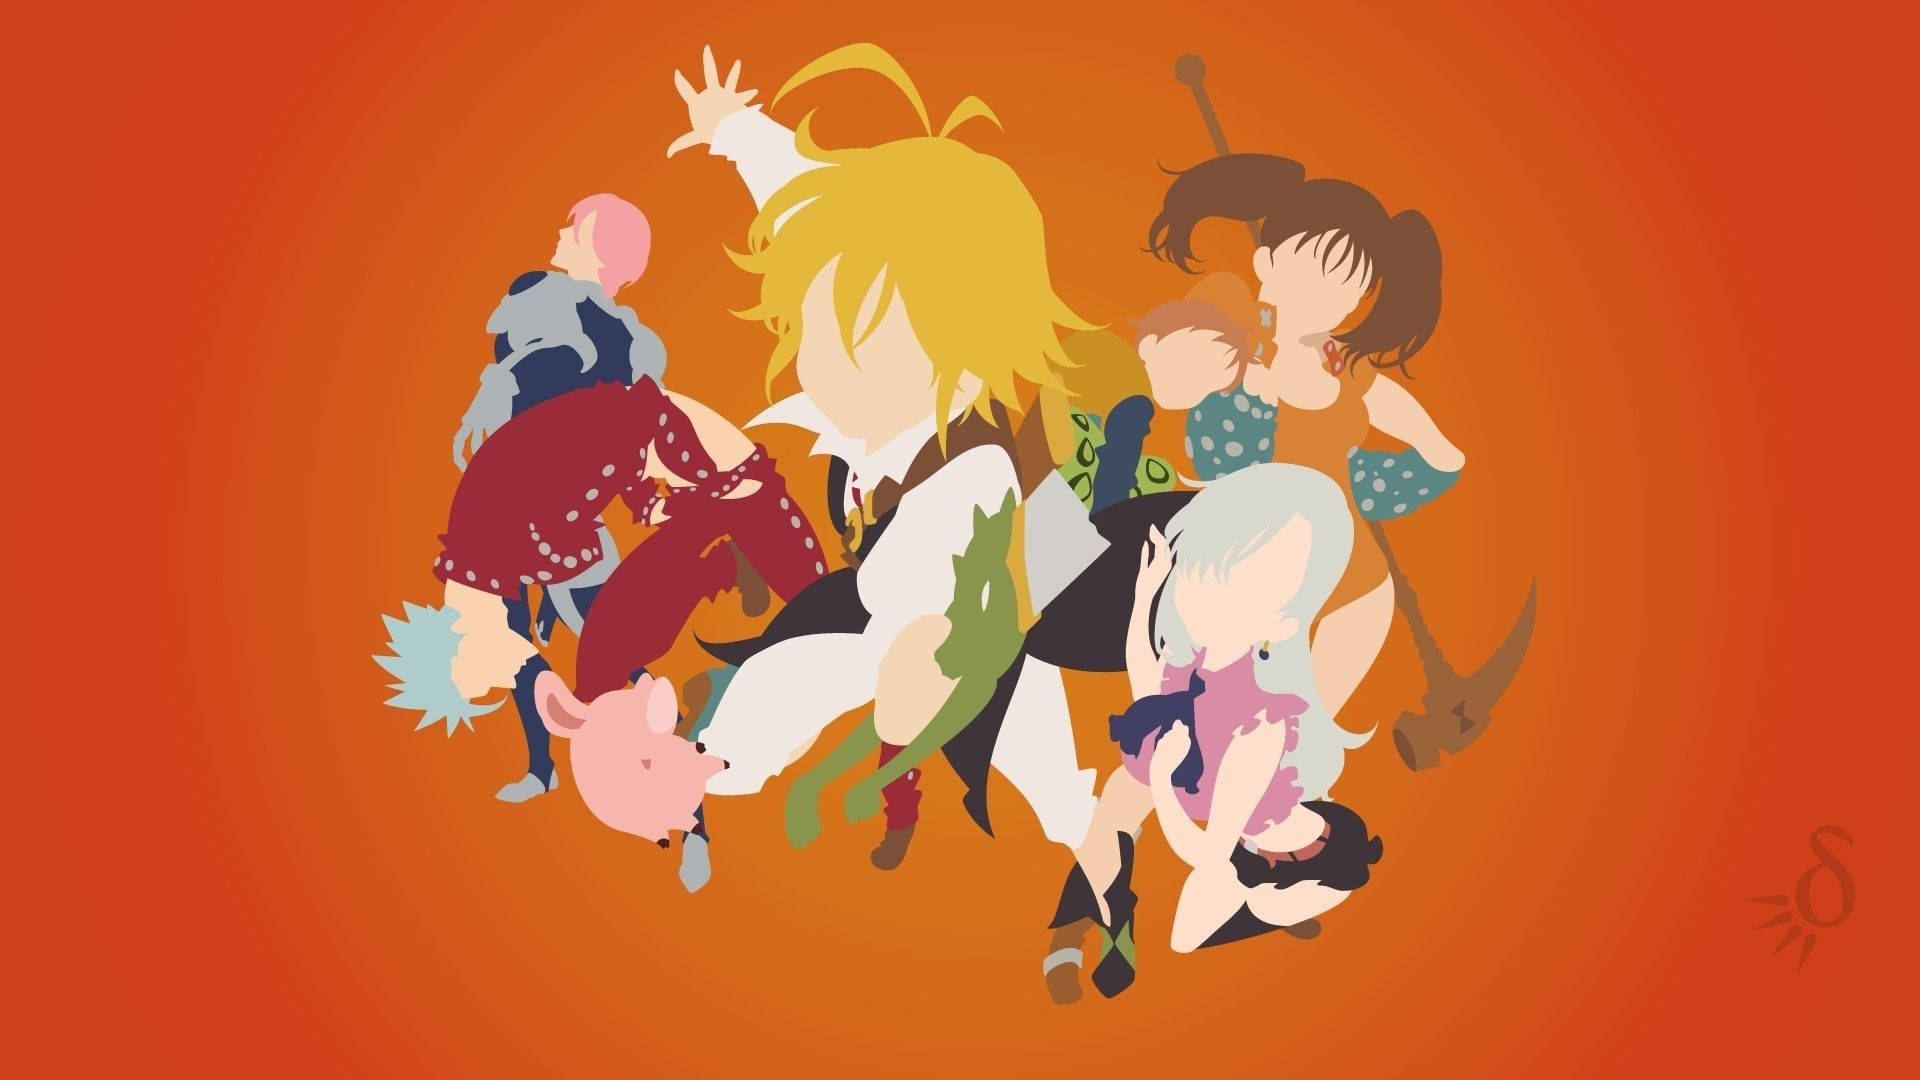 "The Seven Deadly Sins: An Amusing Take on a Classic Tale" Wallpaper